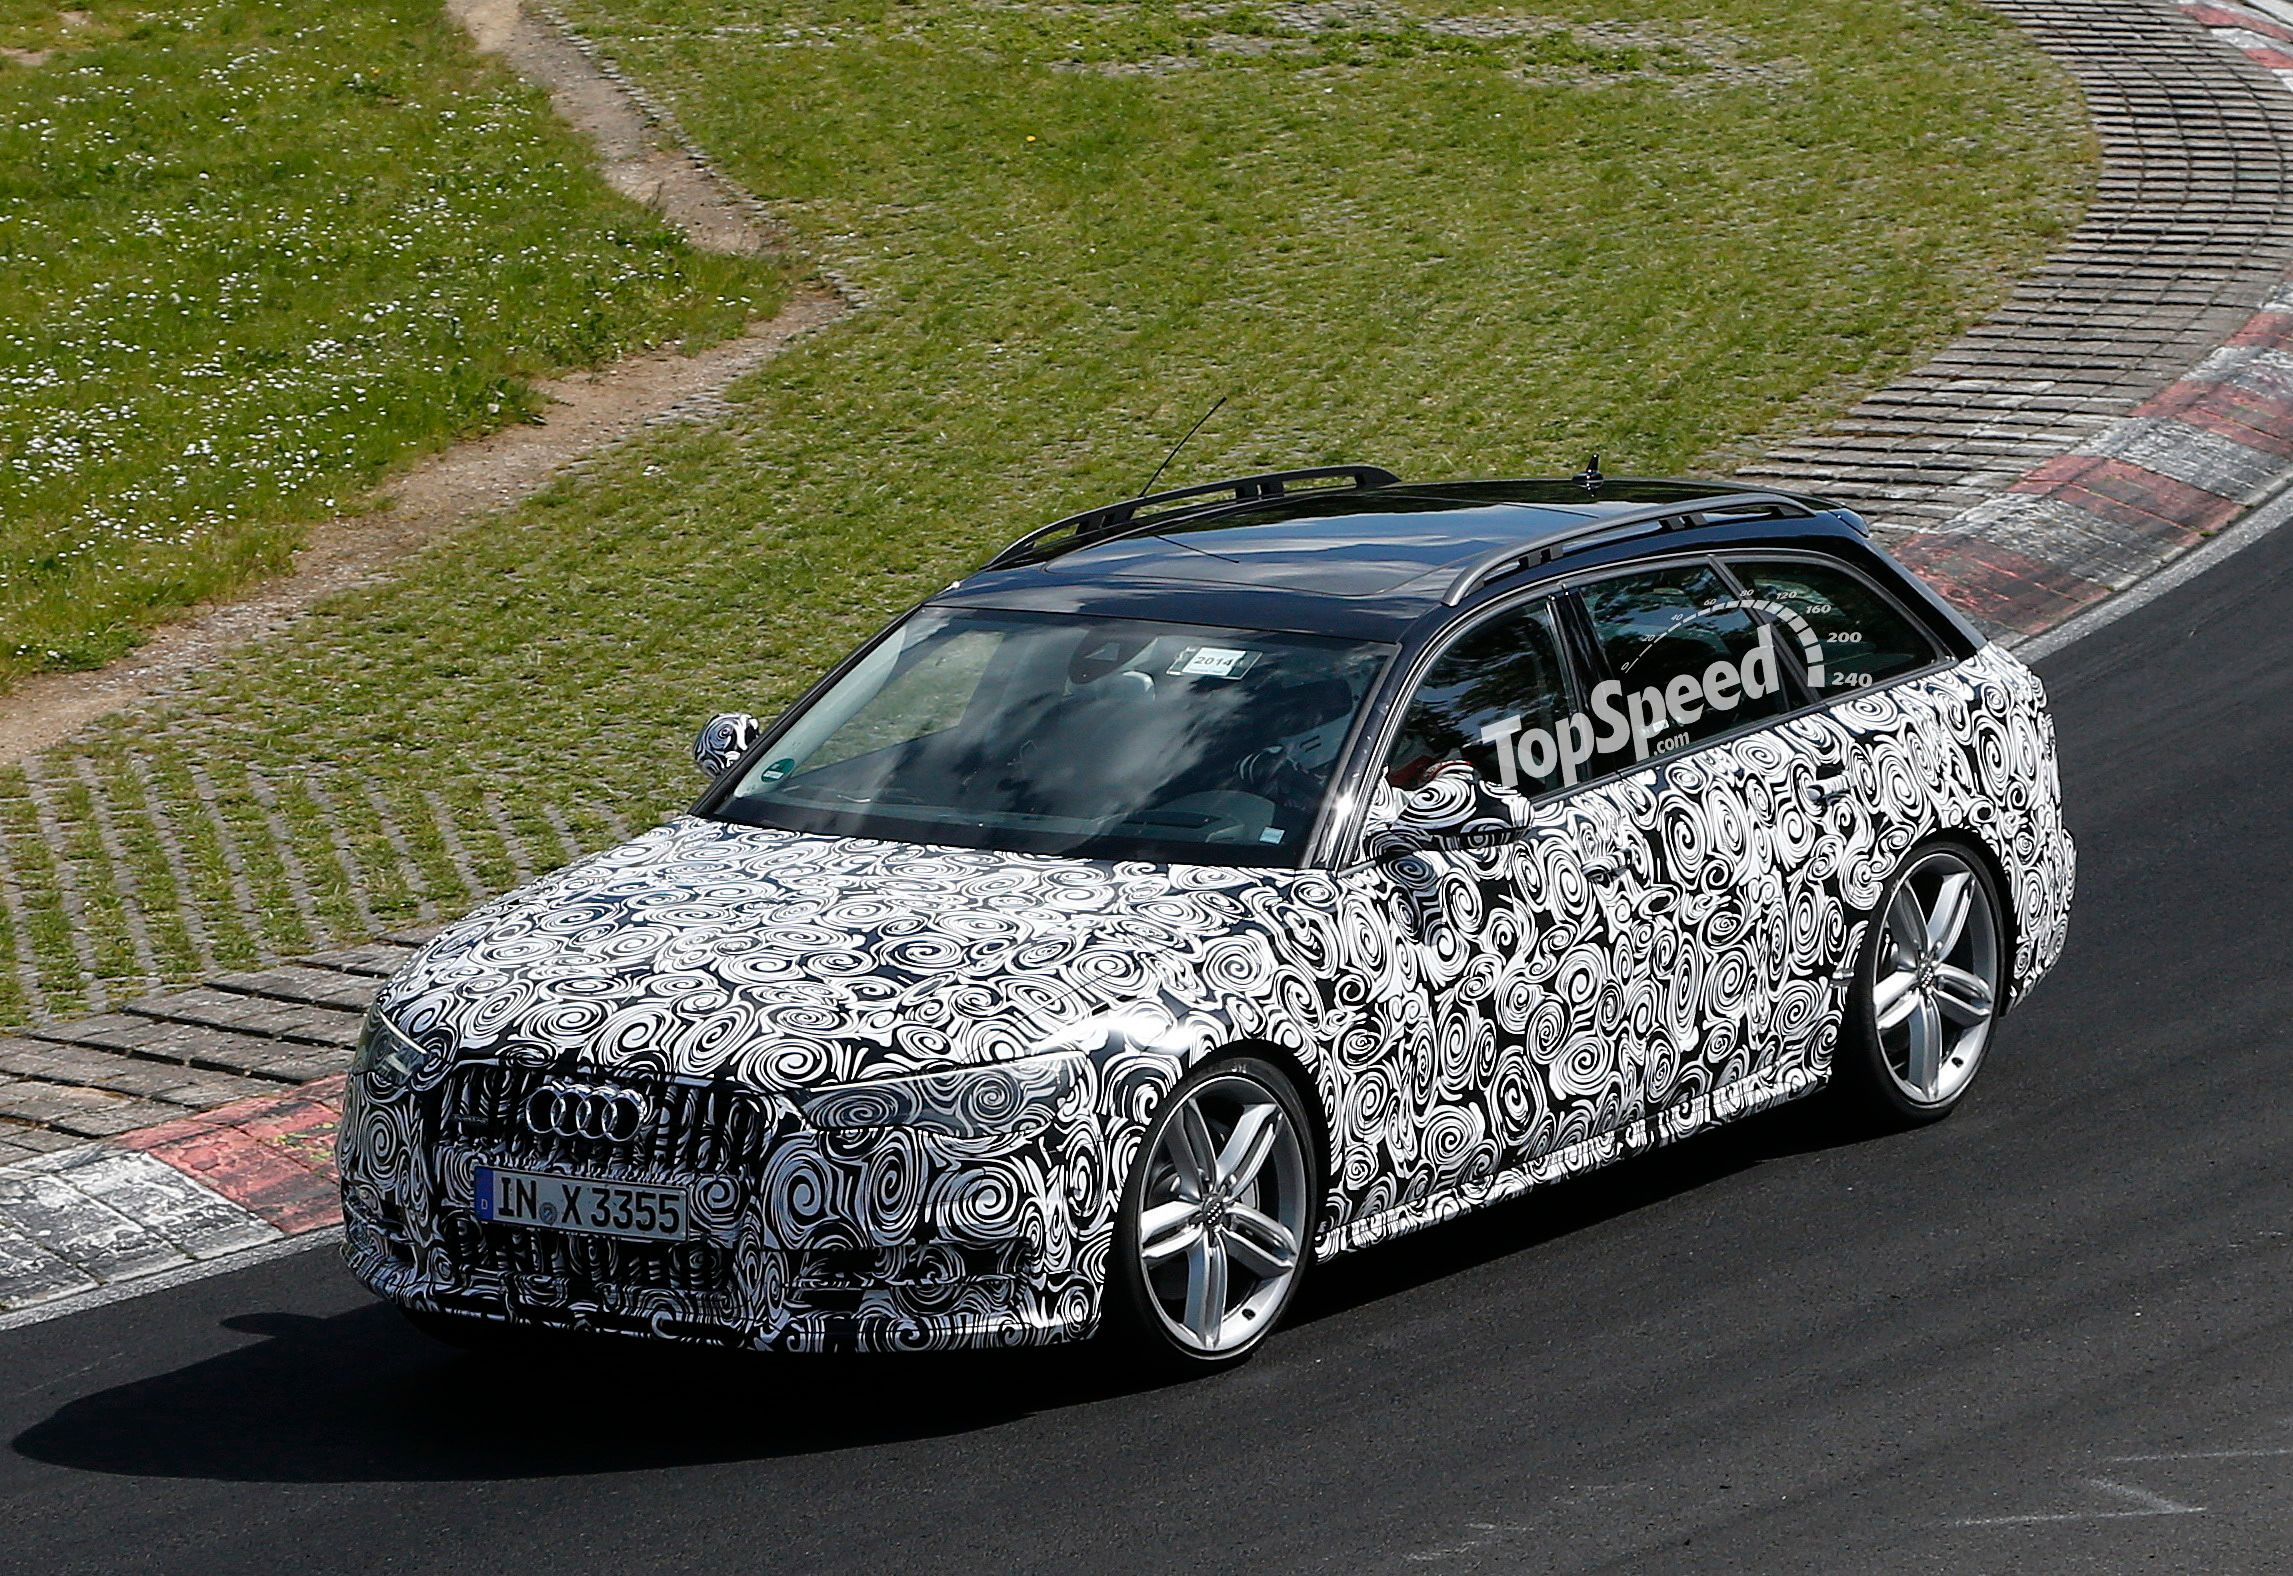 2014 Spy Shots: Audi A6 Allroad Caught Lapping the Nurburgring